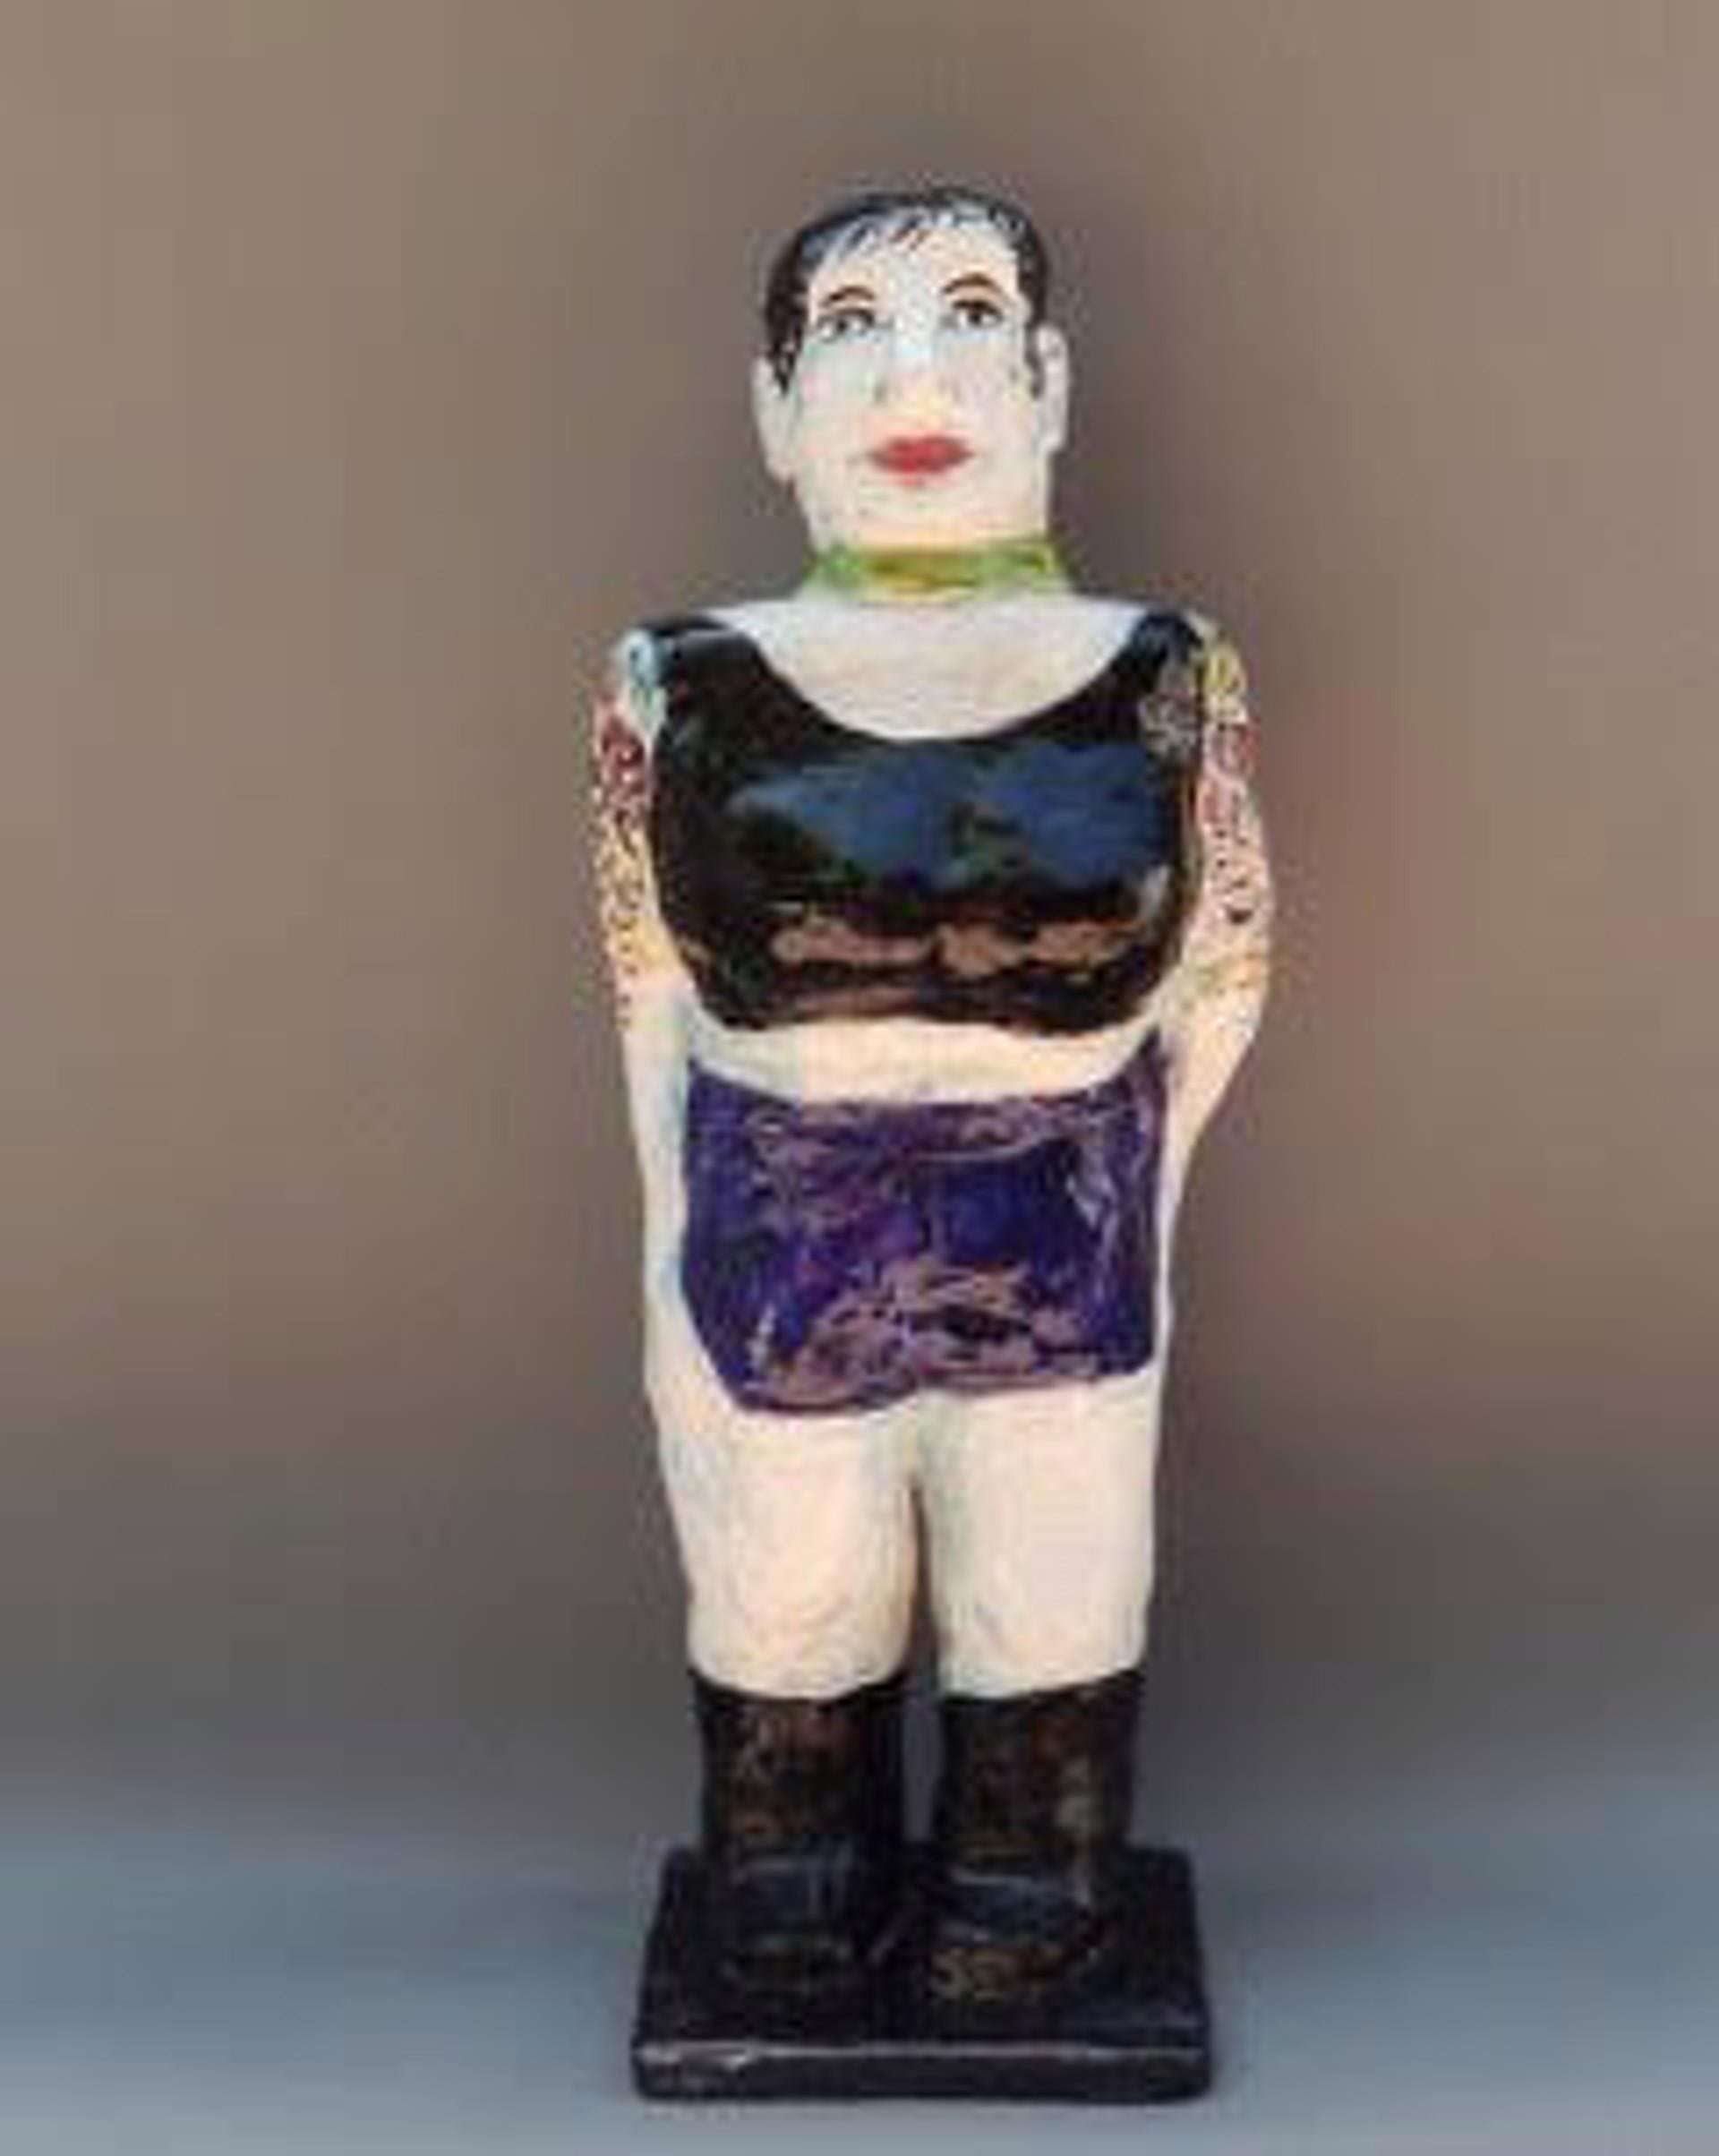 Woman with Tattoos, 2015 - Art by Linda Smith